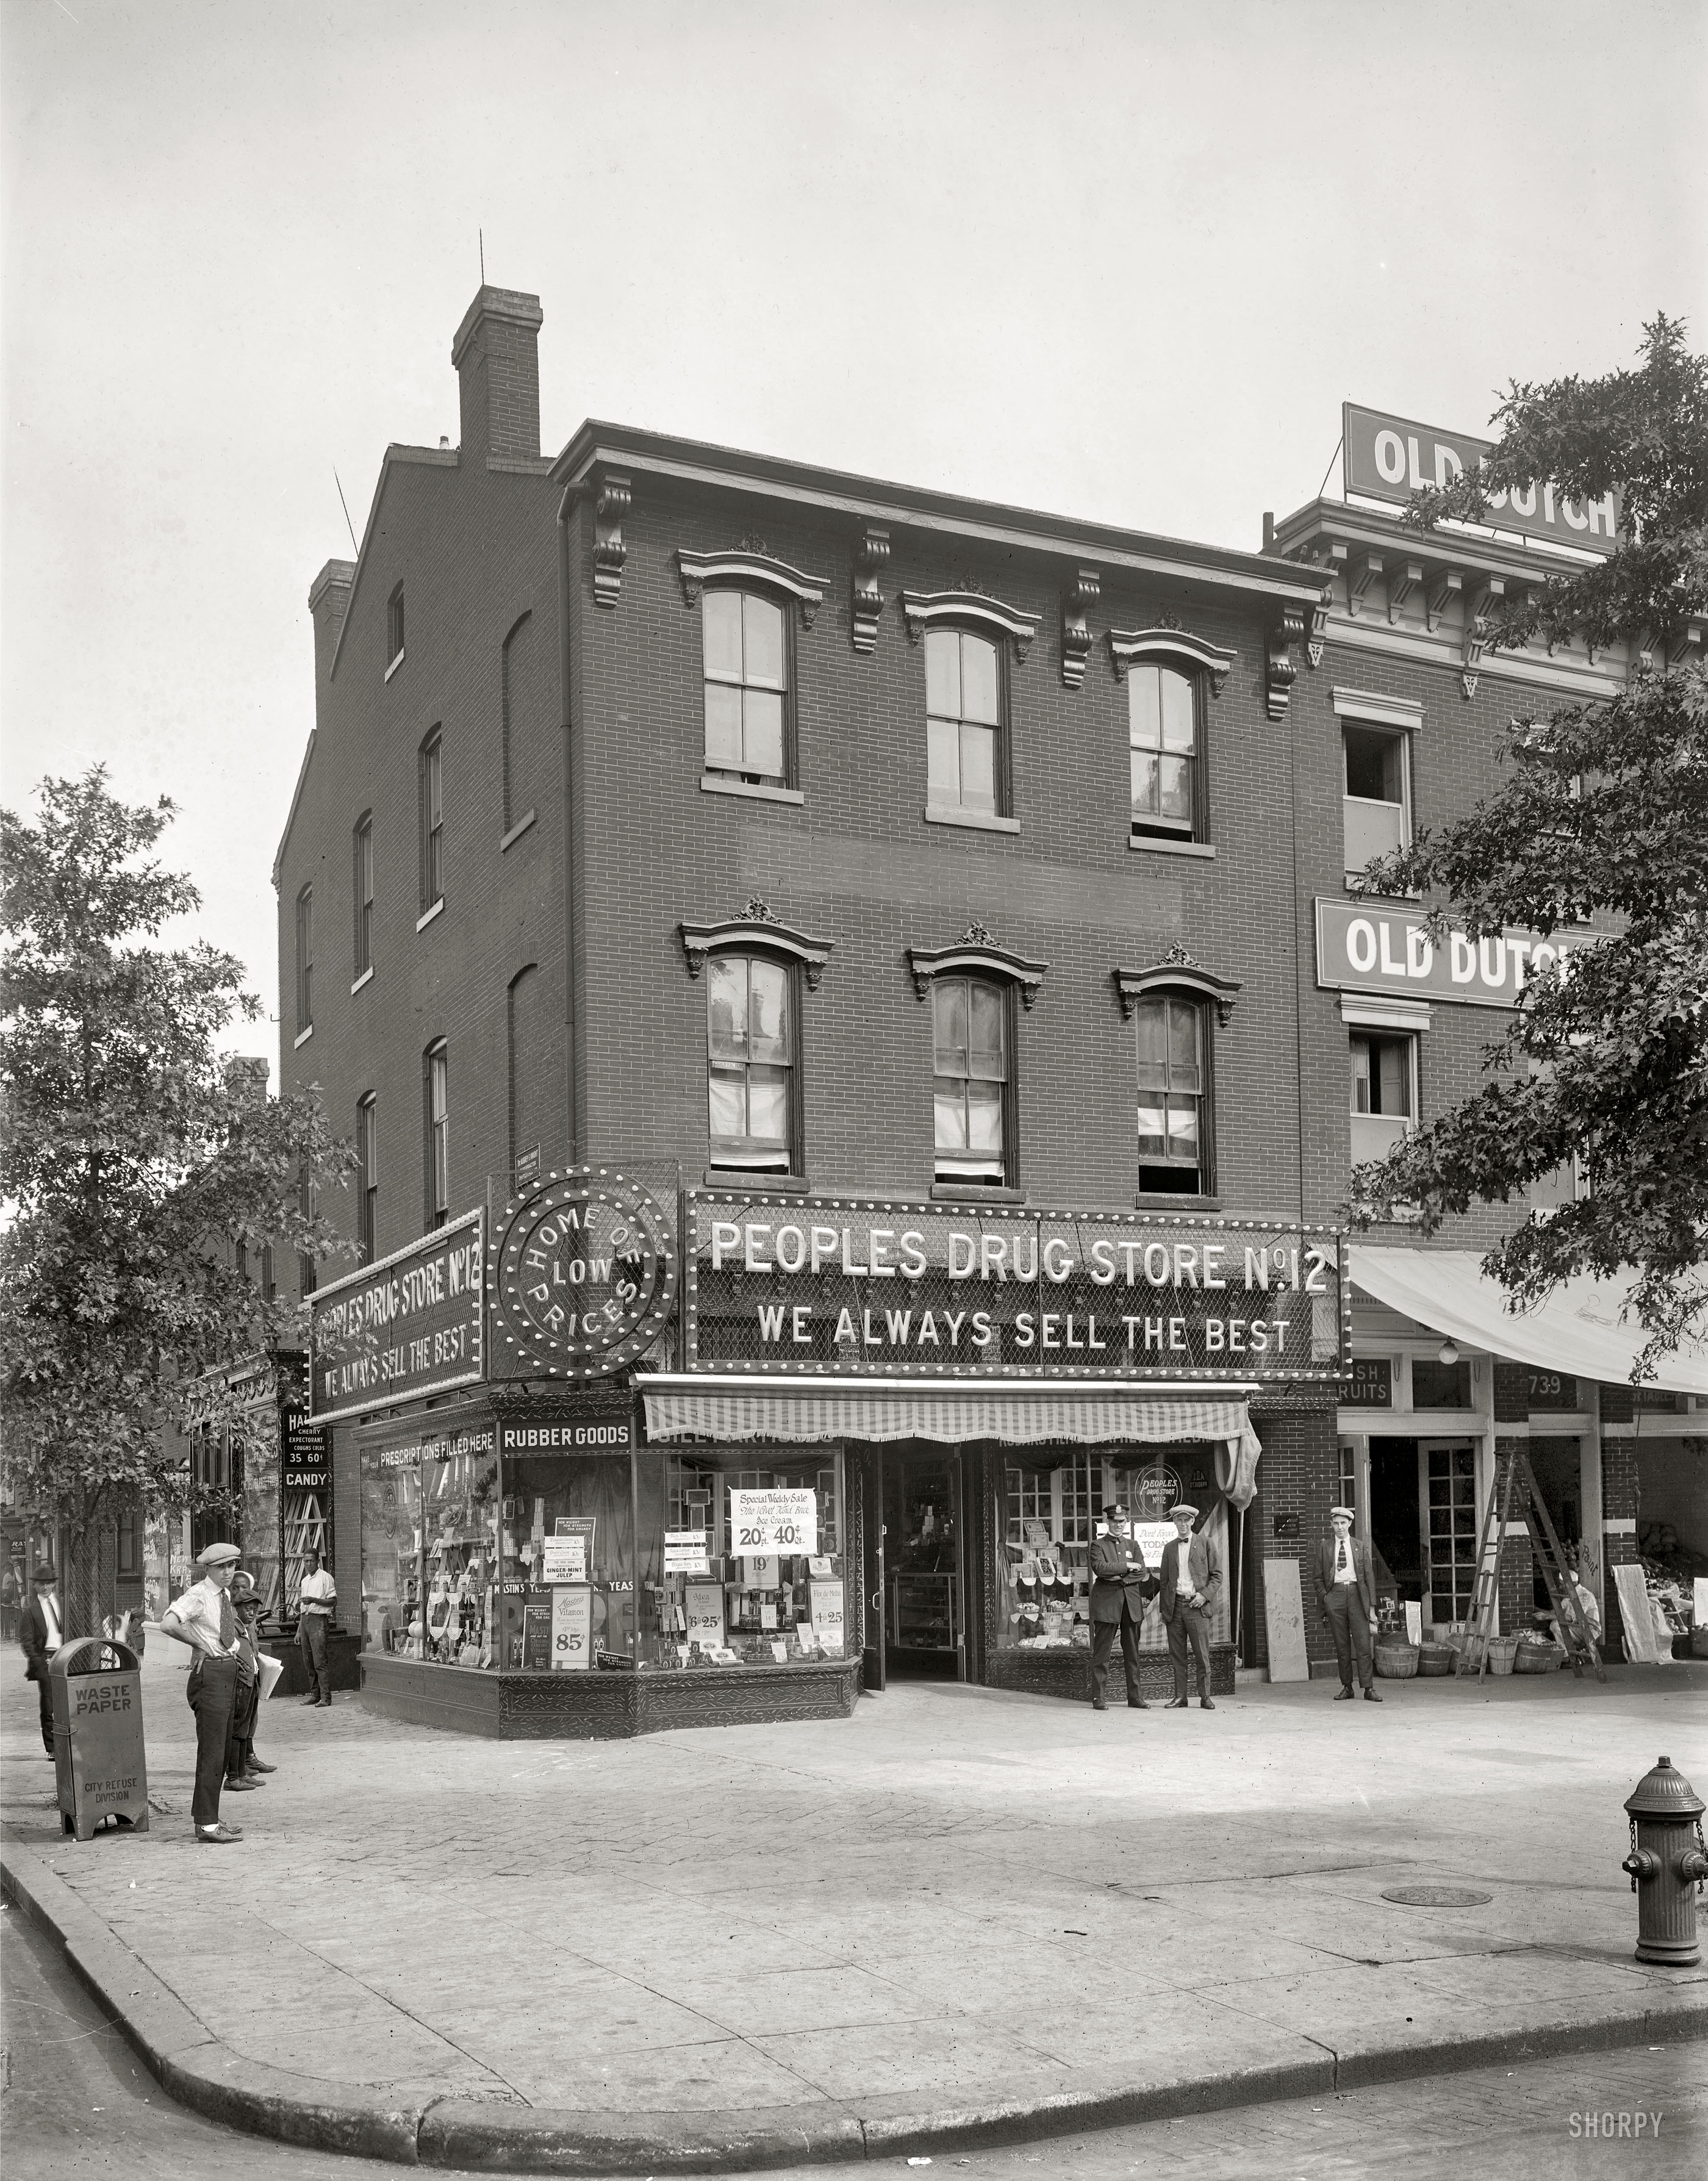 Washington, D.C., circa 1922. "People's Drug Store No. 12, North Capitol and H." National Photo Co. Collection glass negative, 8 x 10 inches. View full size.